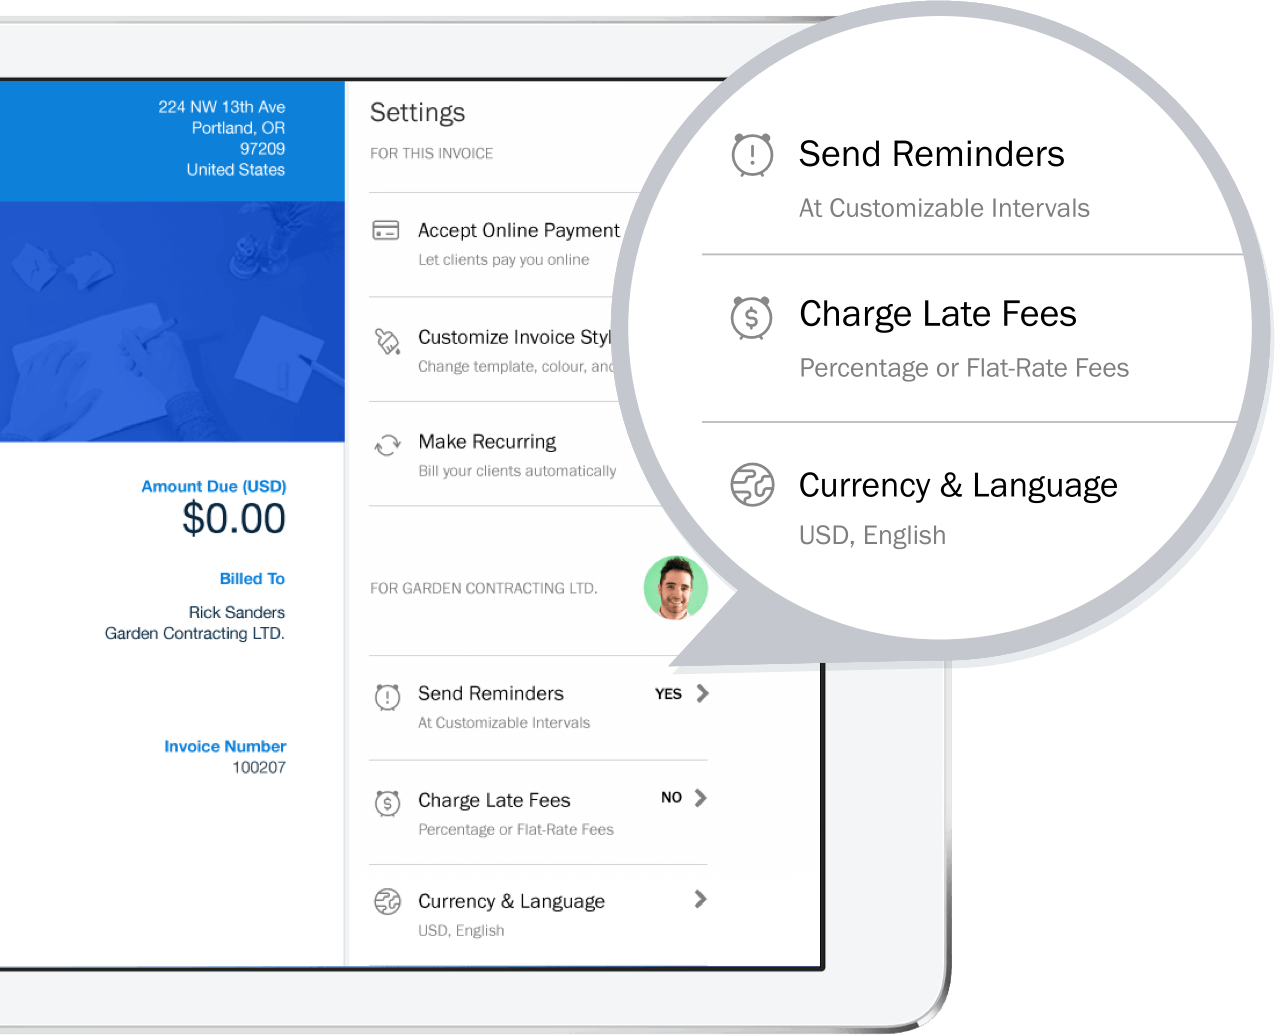 FreshBooks also includes customizable invoice designs.